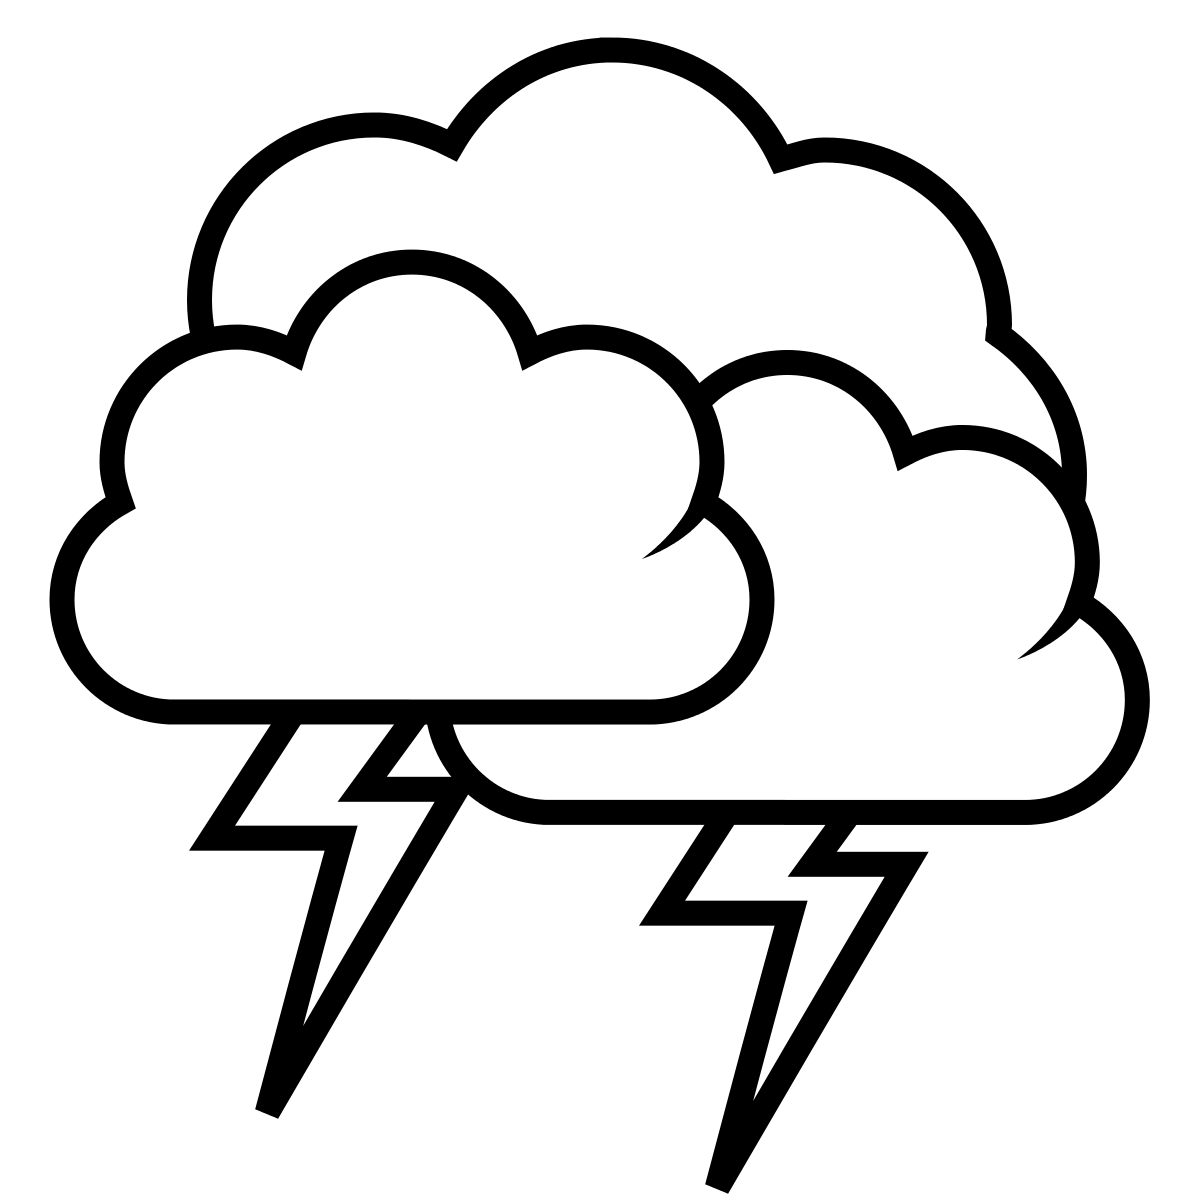 Weight clipart outline. Rainstorm tango weather storm